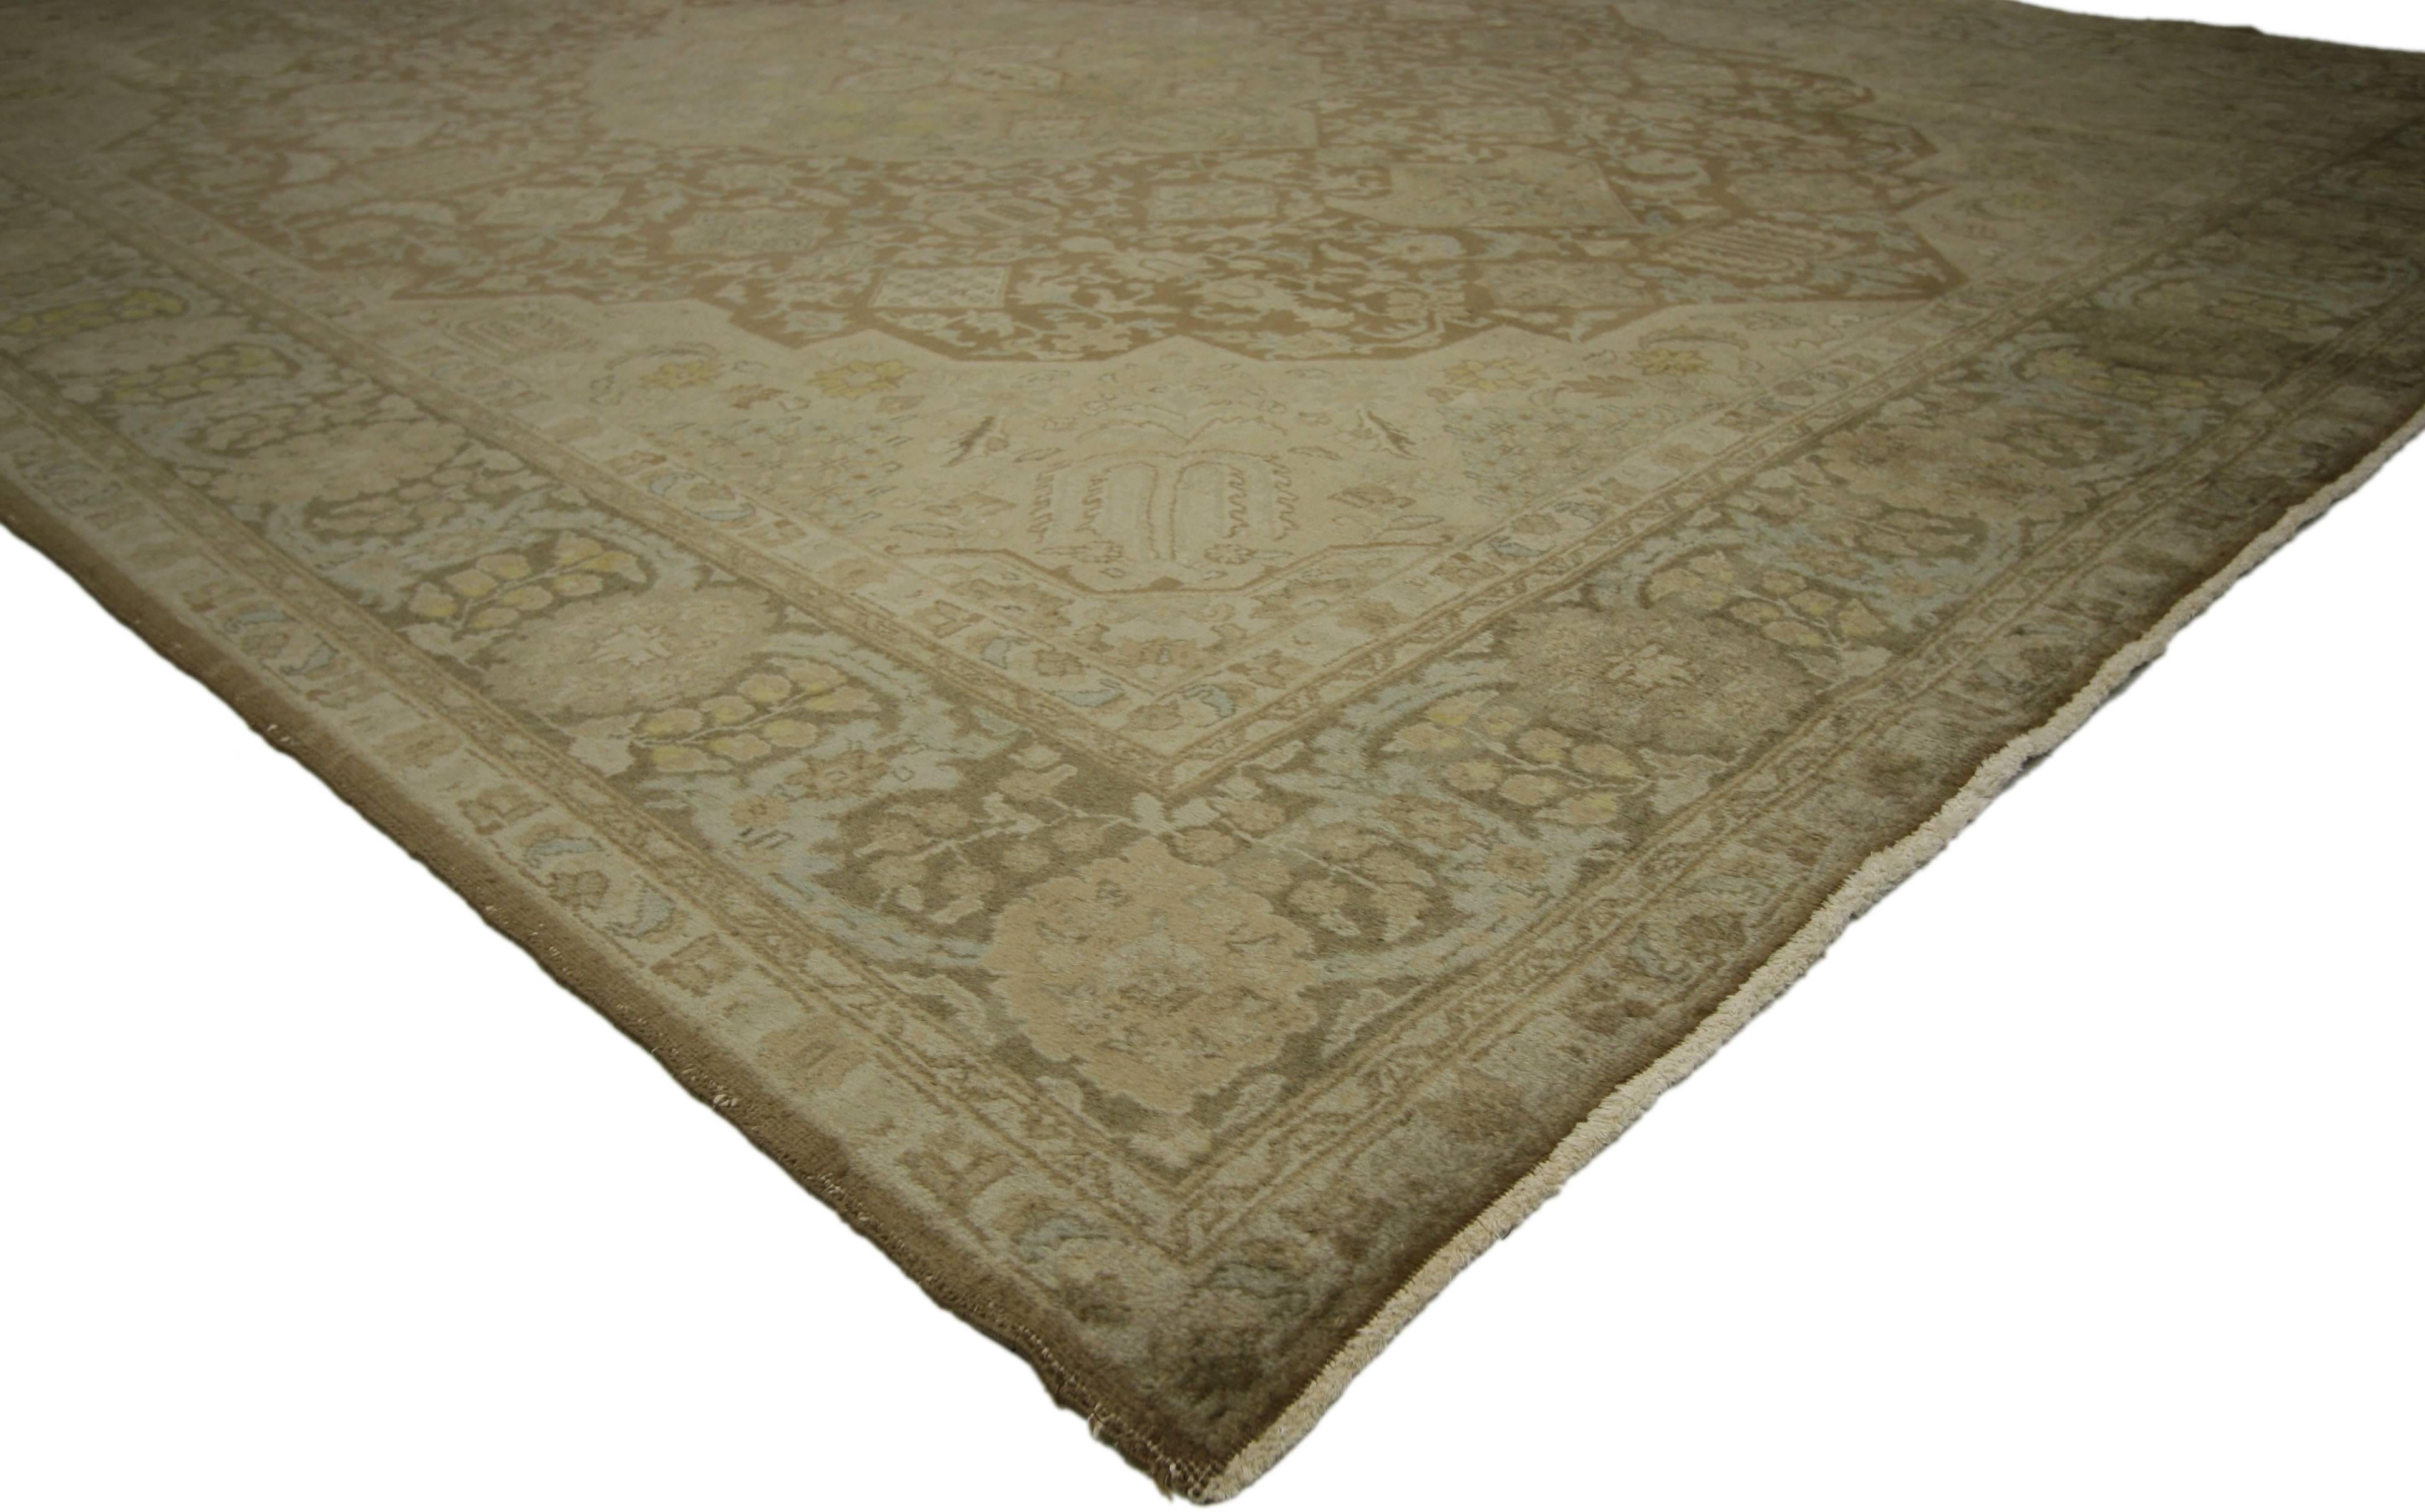 75889 Vintage Persian Tabriz Area Rug 09'09 X 13'00. Embodying the highly decorative aesthetic and neutral color palette sought by many, this hand-knotted wool Persian Tabriz highlights a visually striking composition. Featuring a stately yet